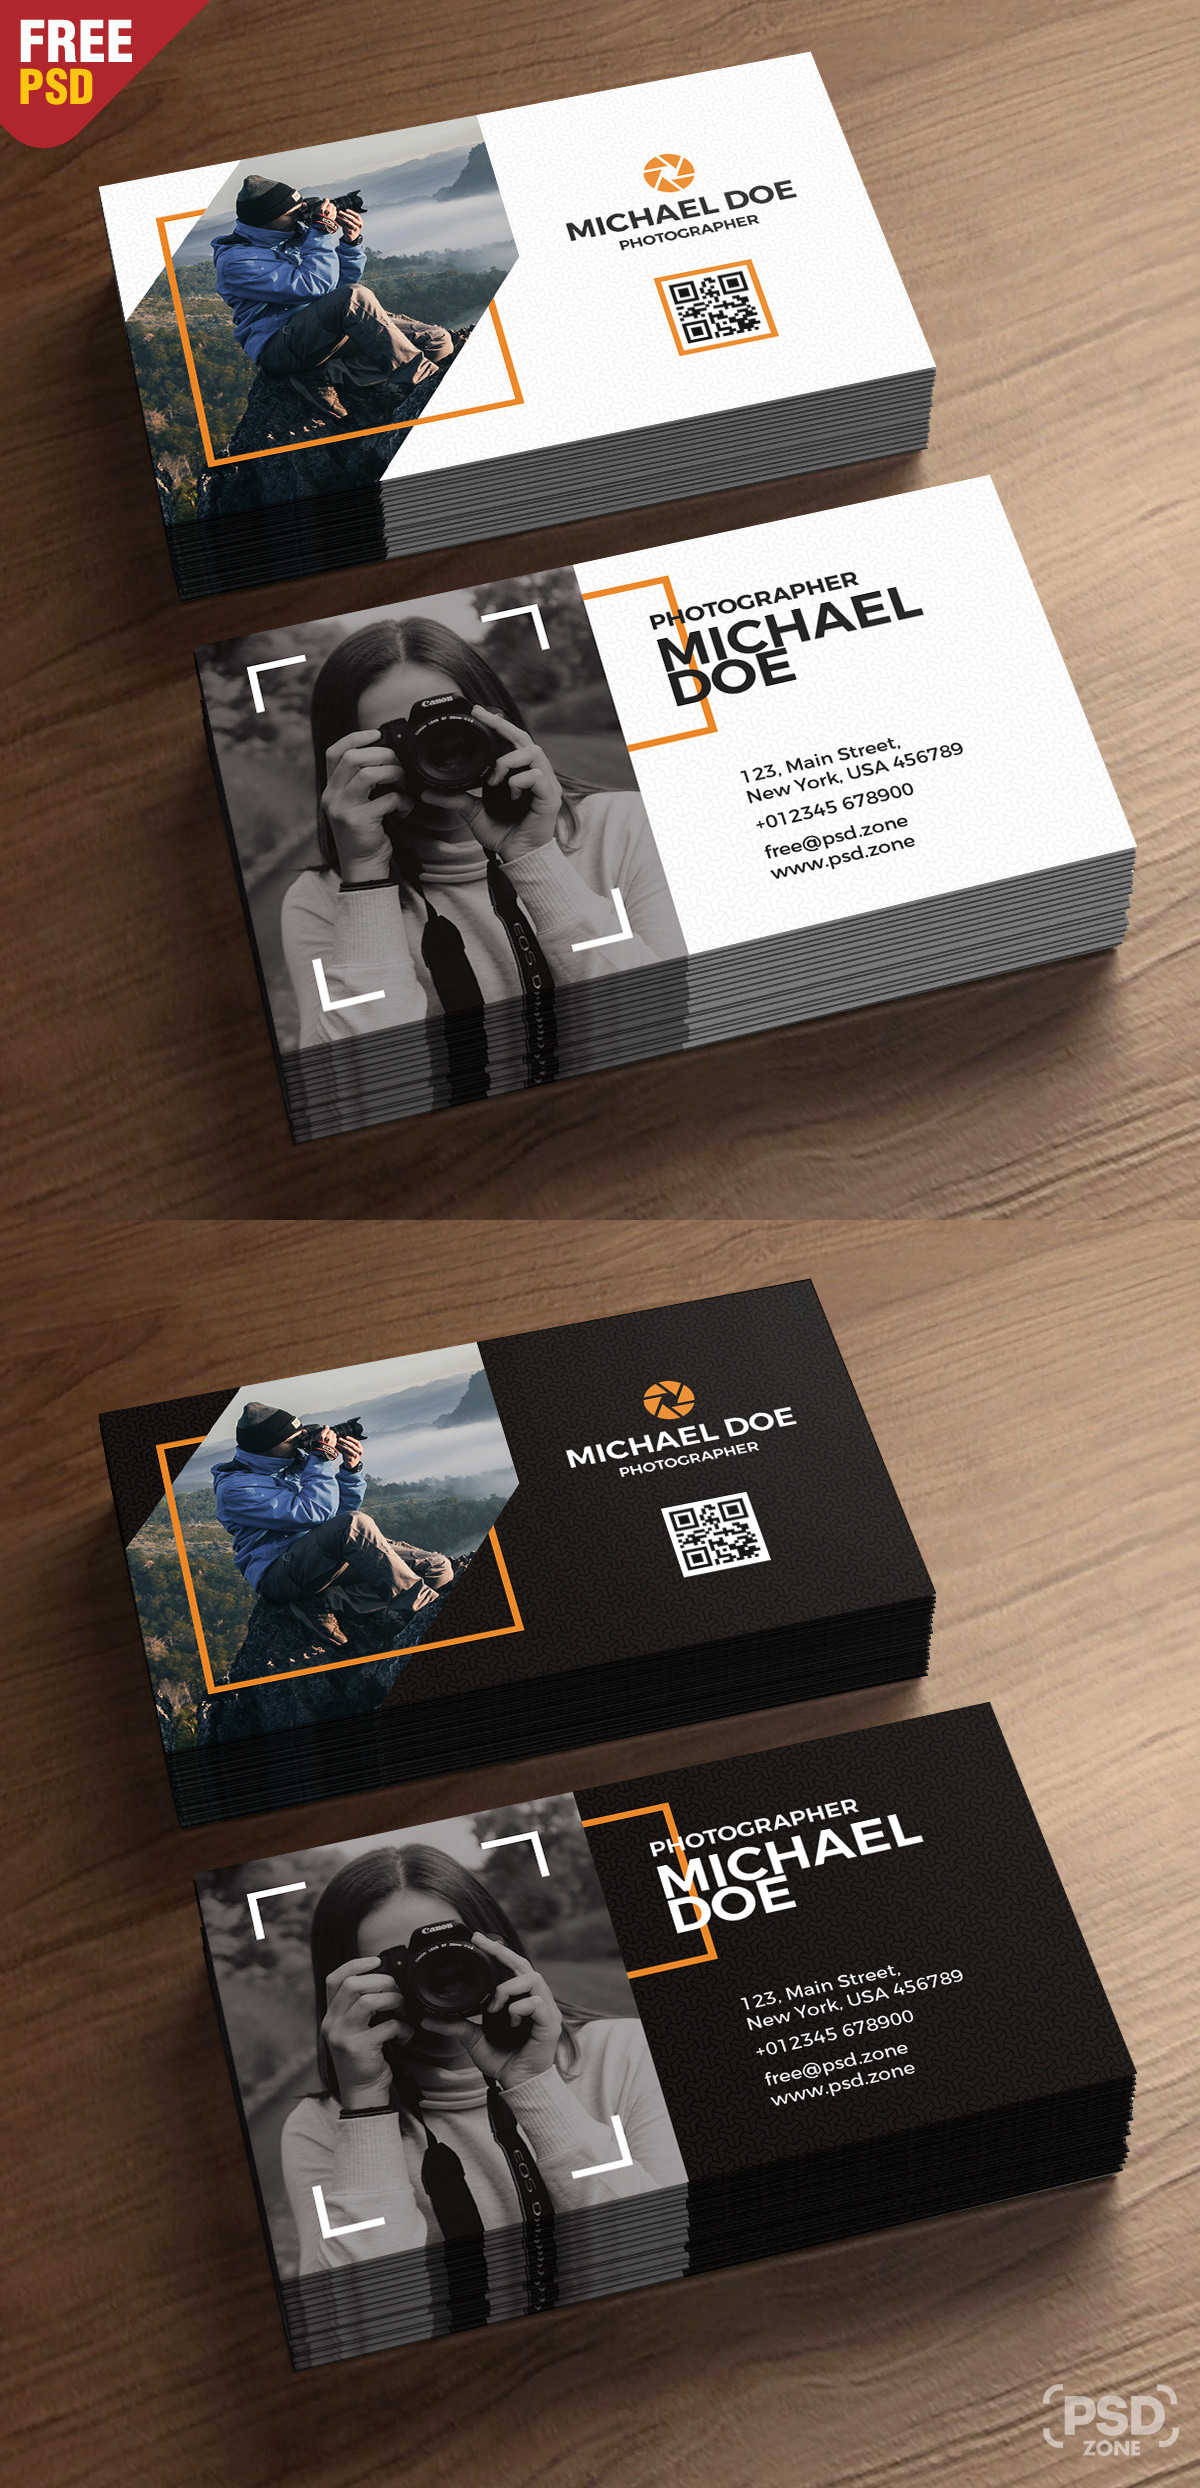 Business Card Size Template Psd